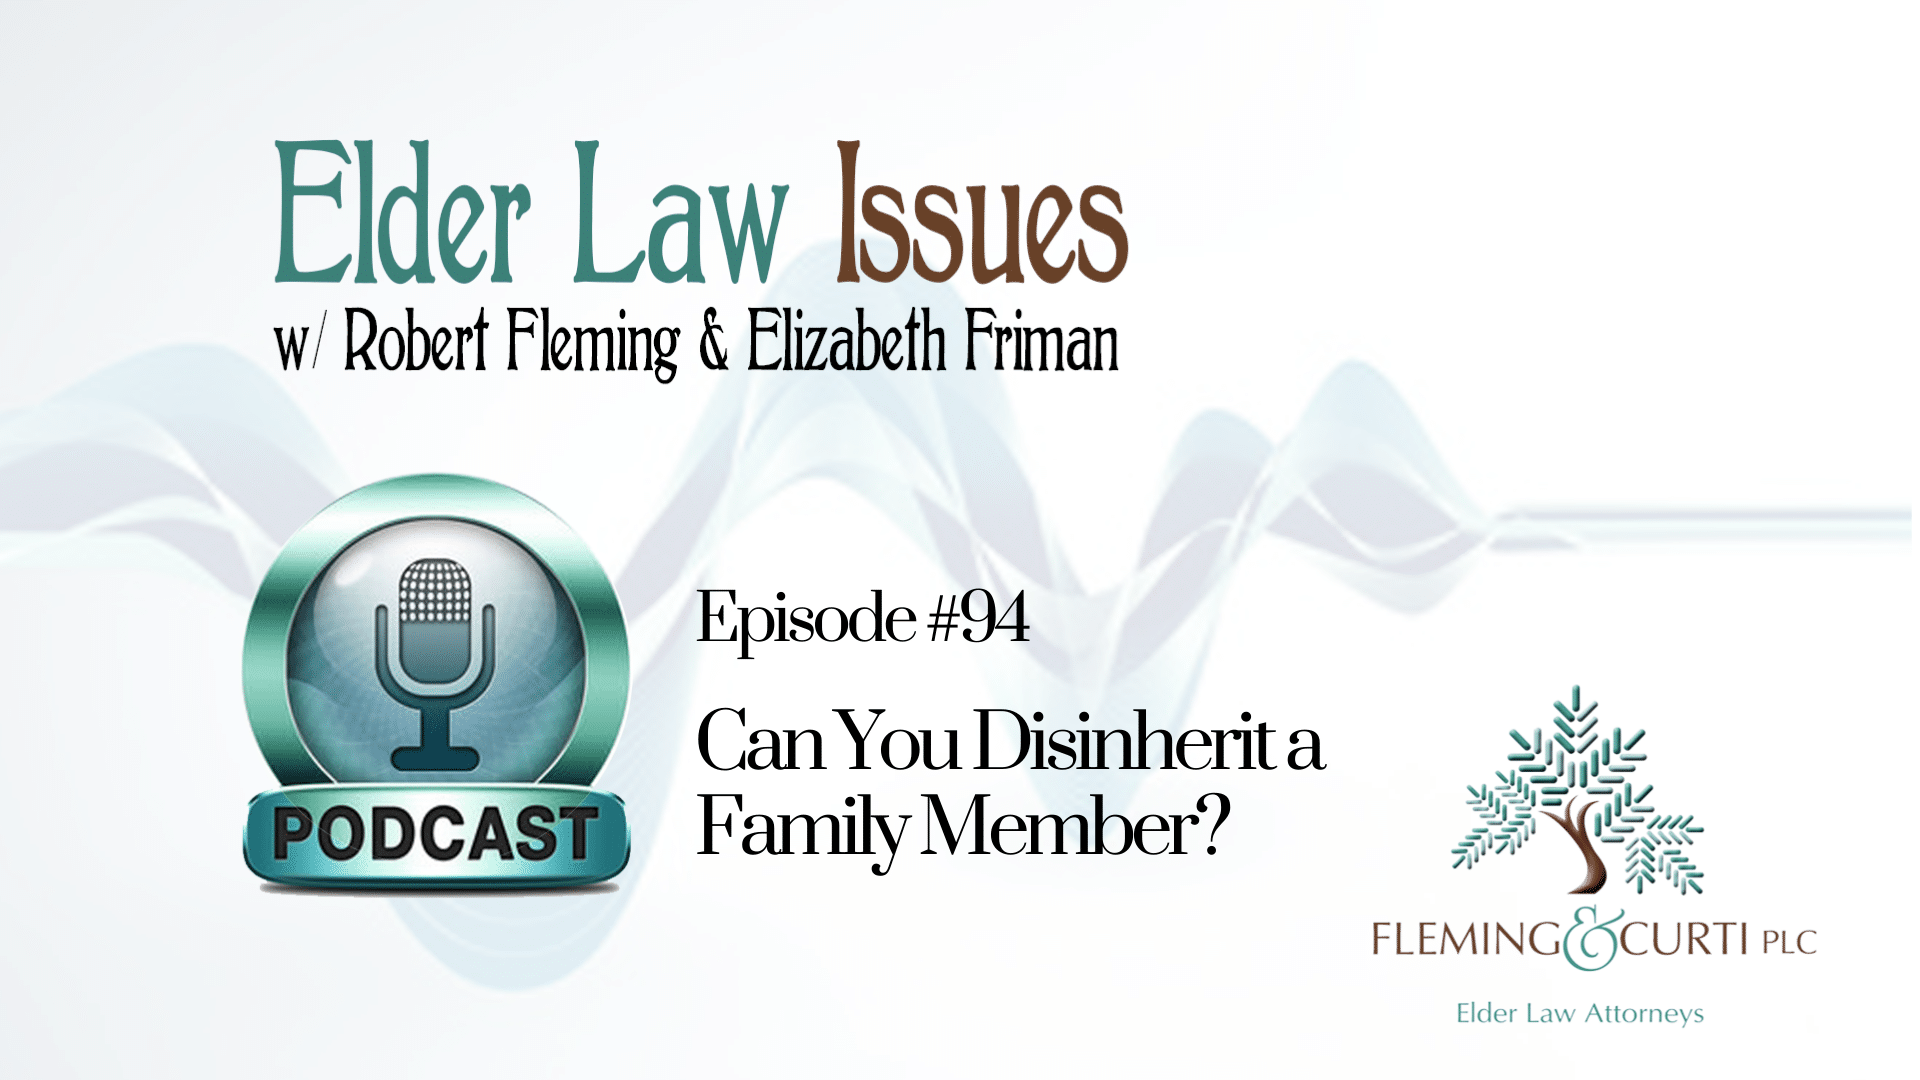 Can you disinherit a family member?